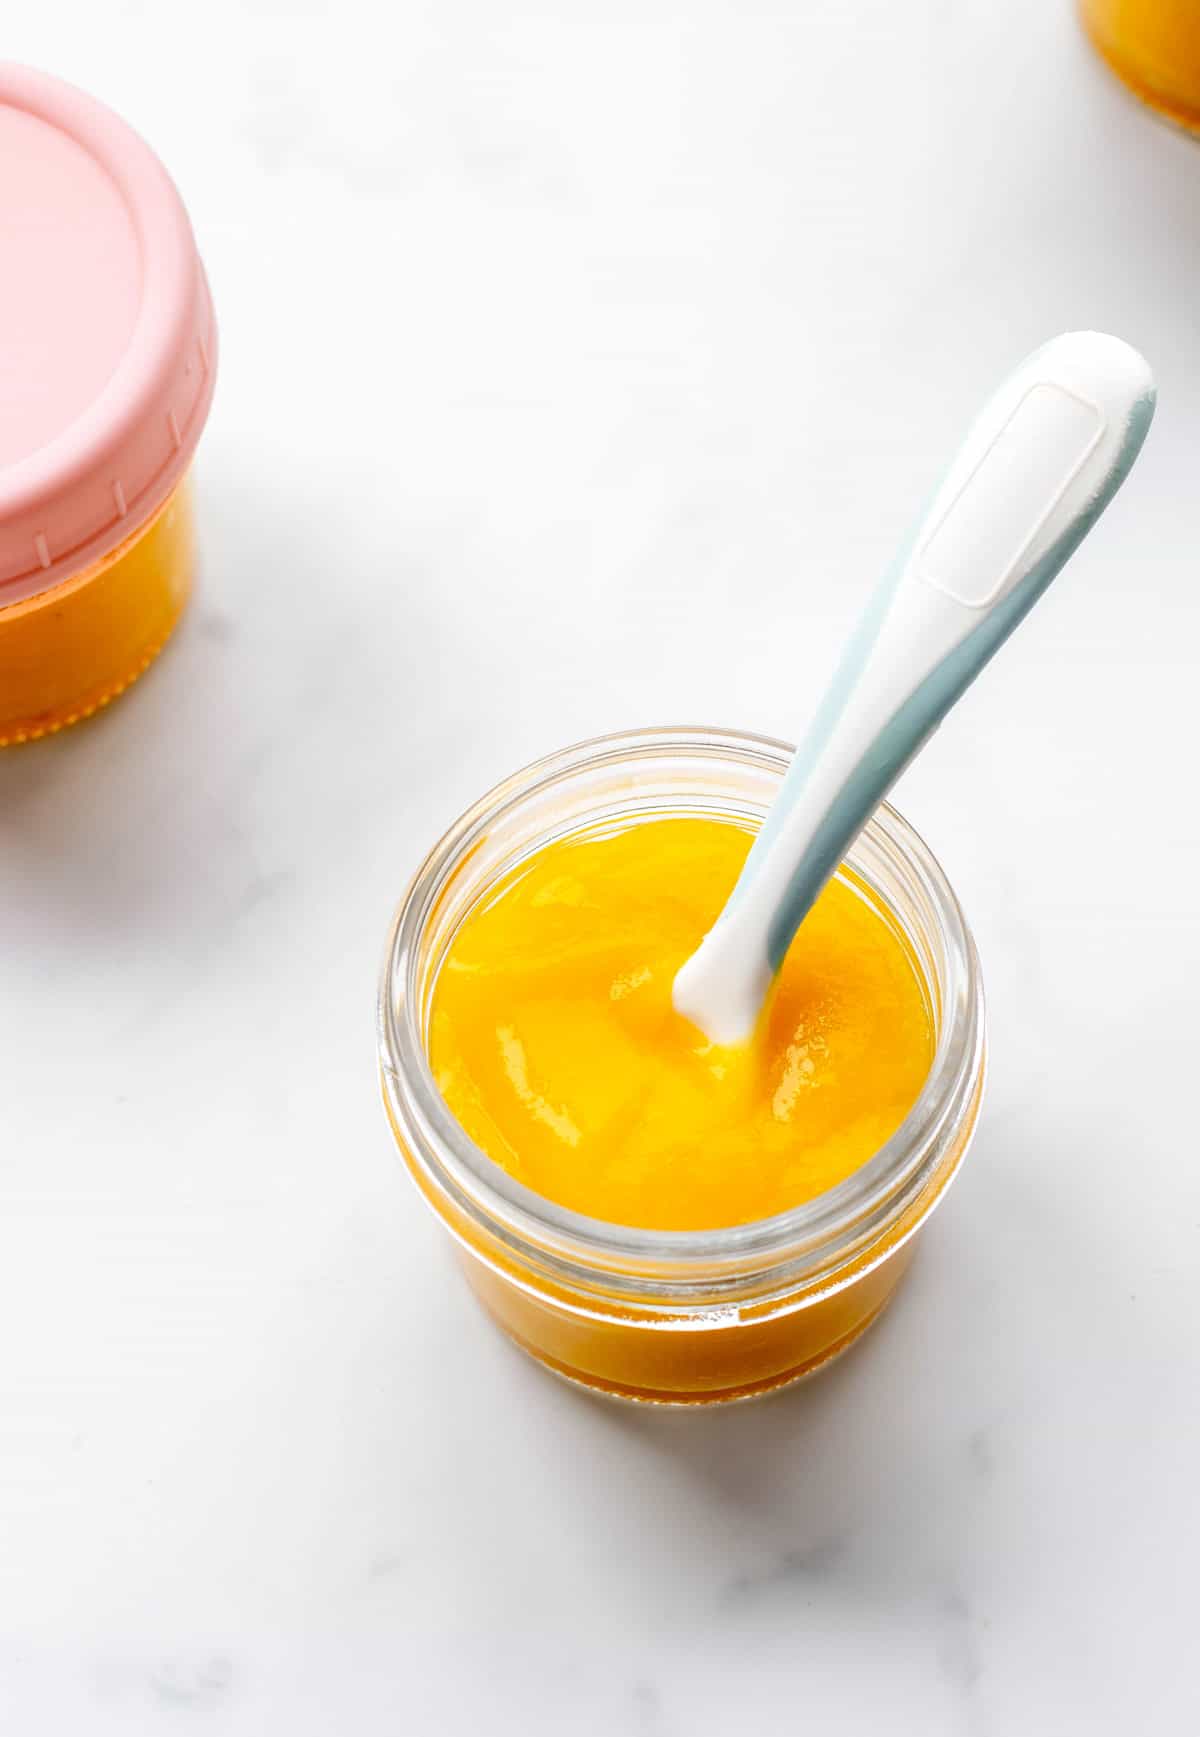 A spoon scooping up some mango puree from a baby jar.